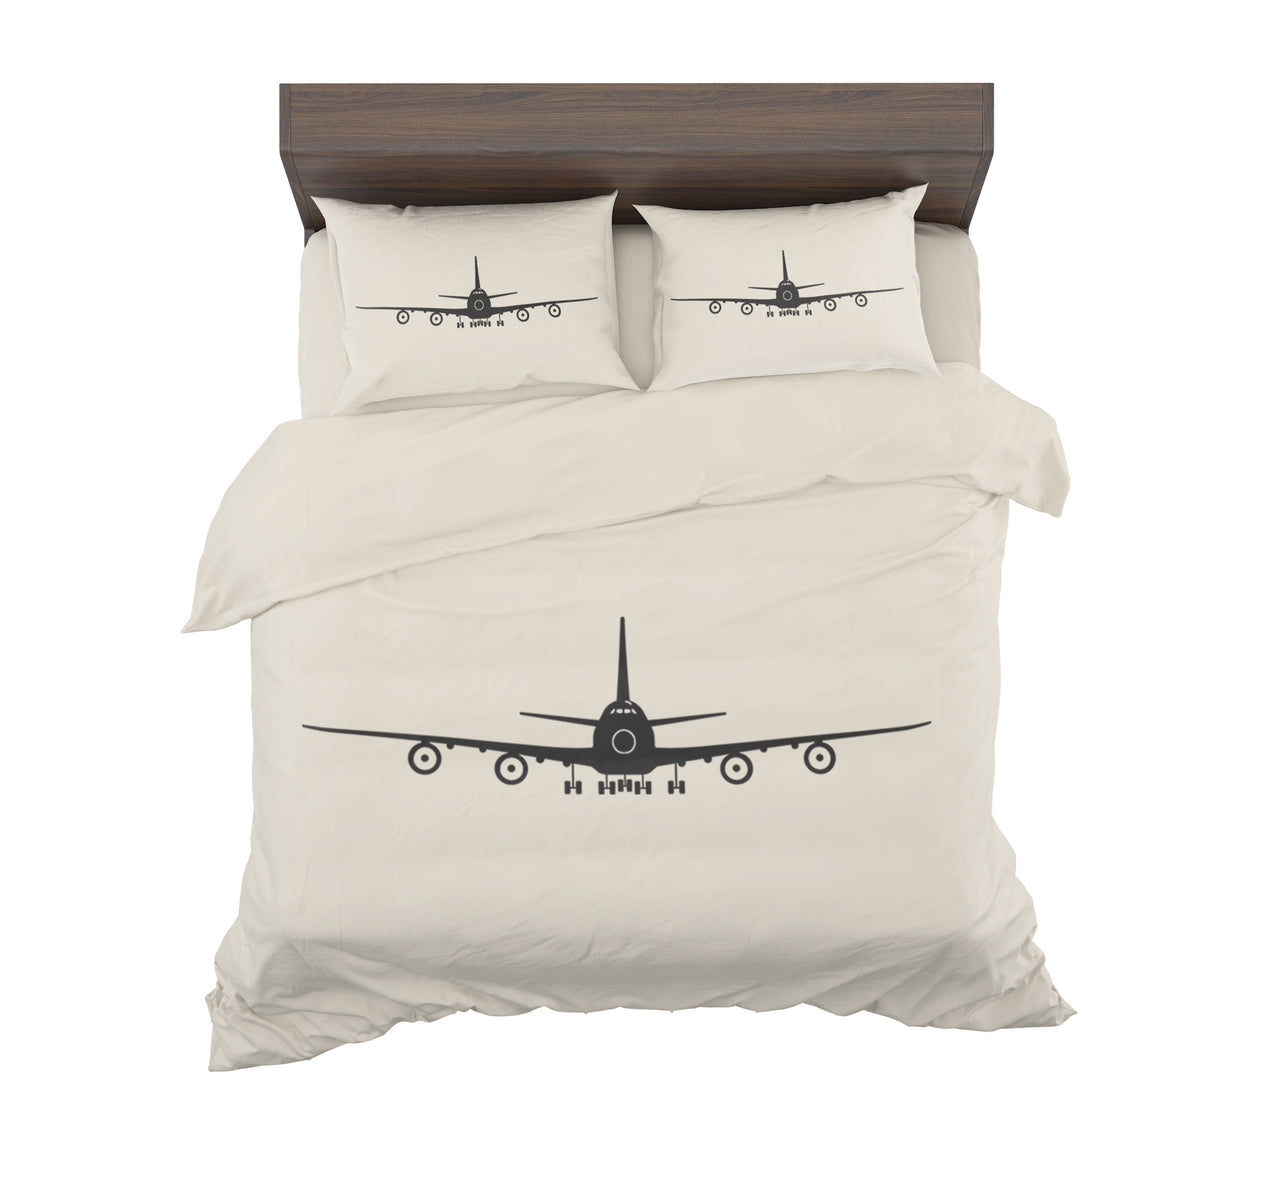 Boeing 747 Silhouette Designed Bedding Sets